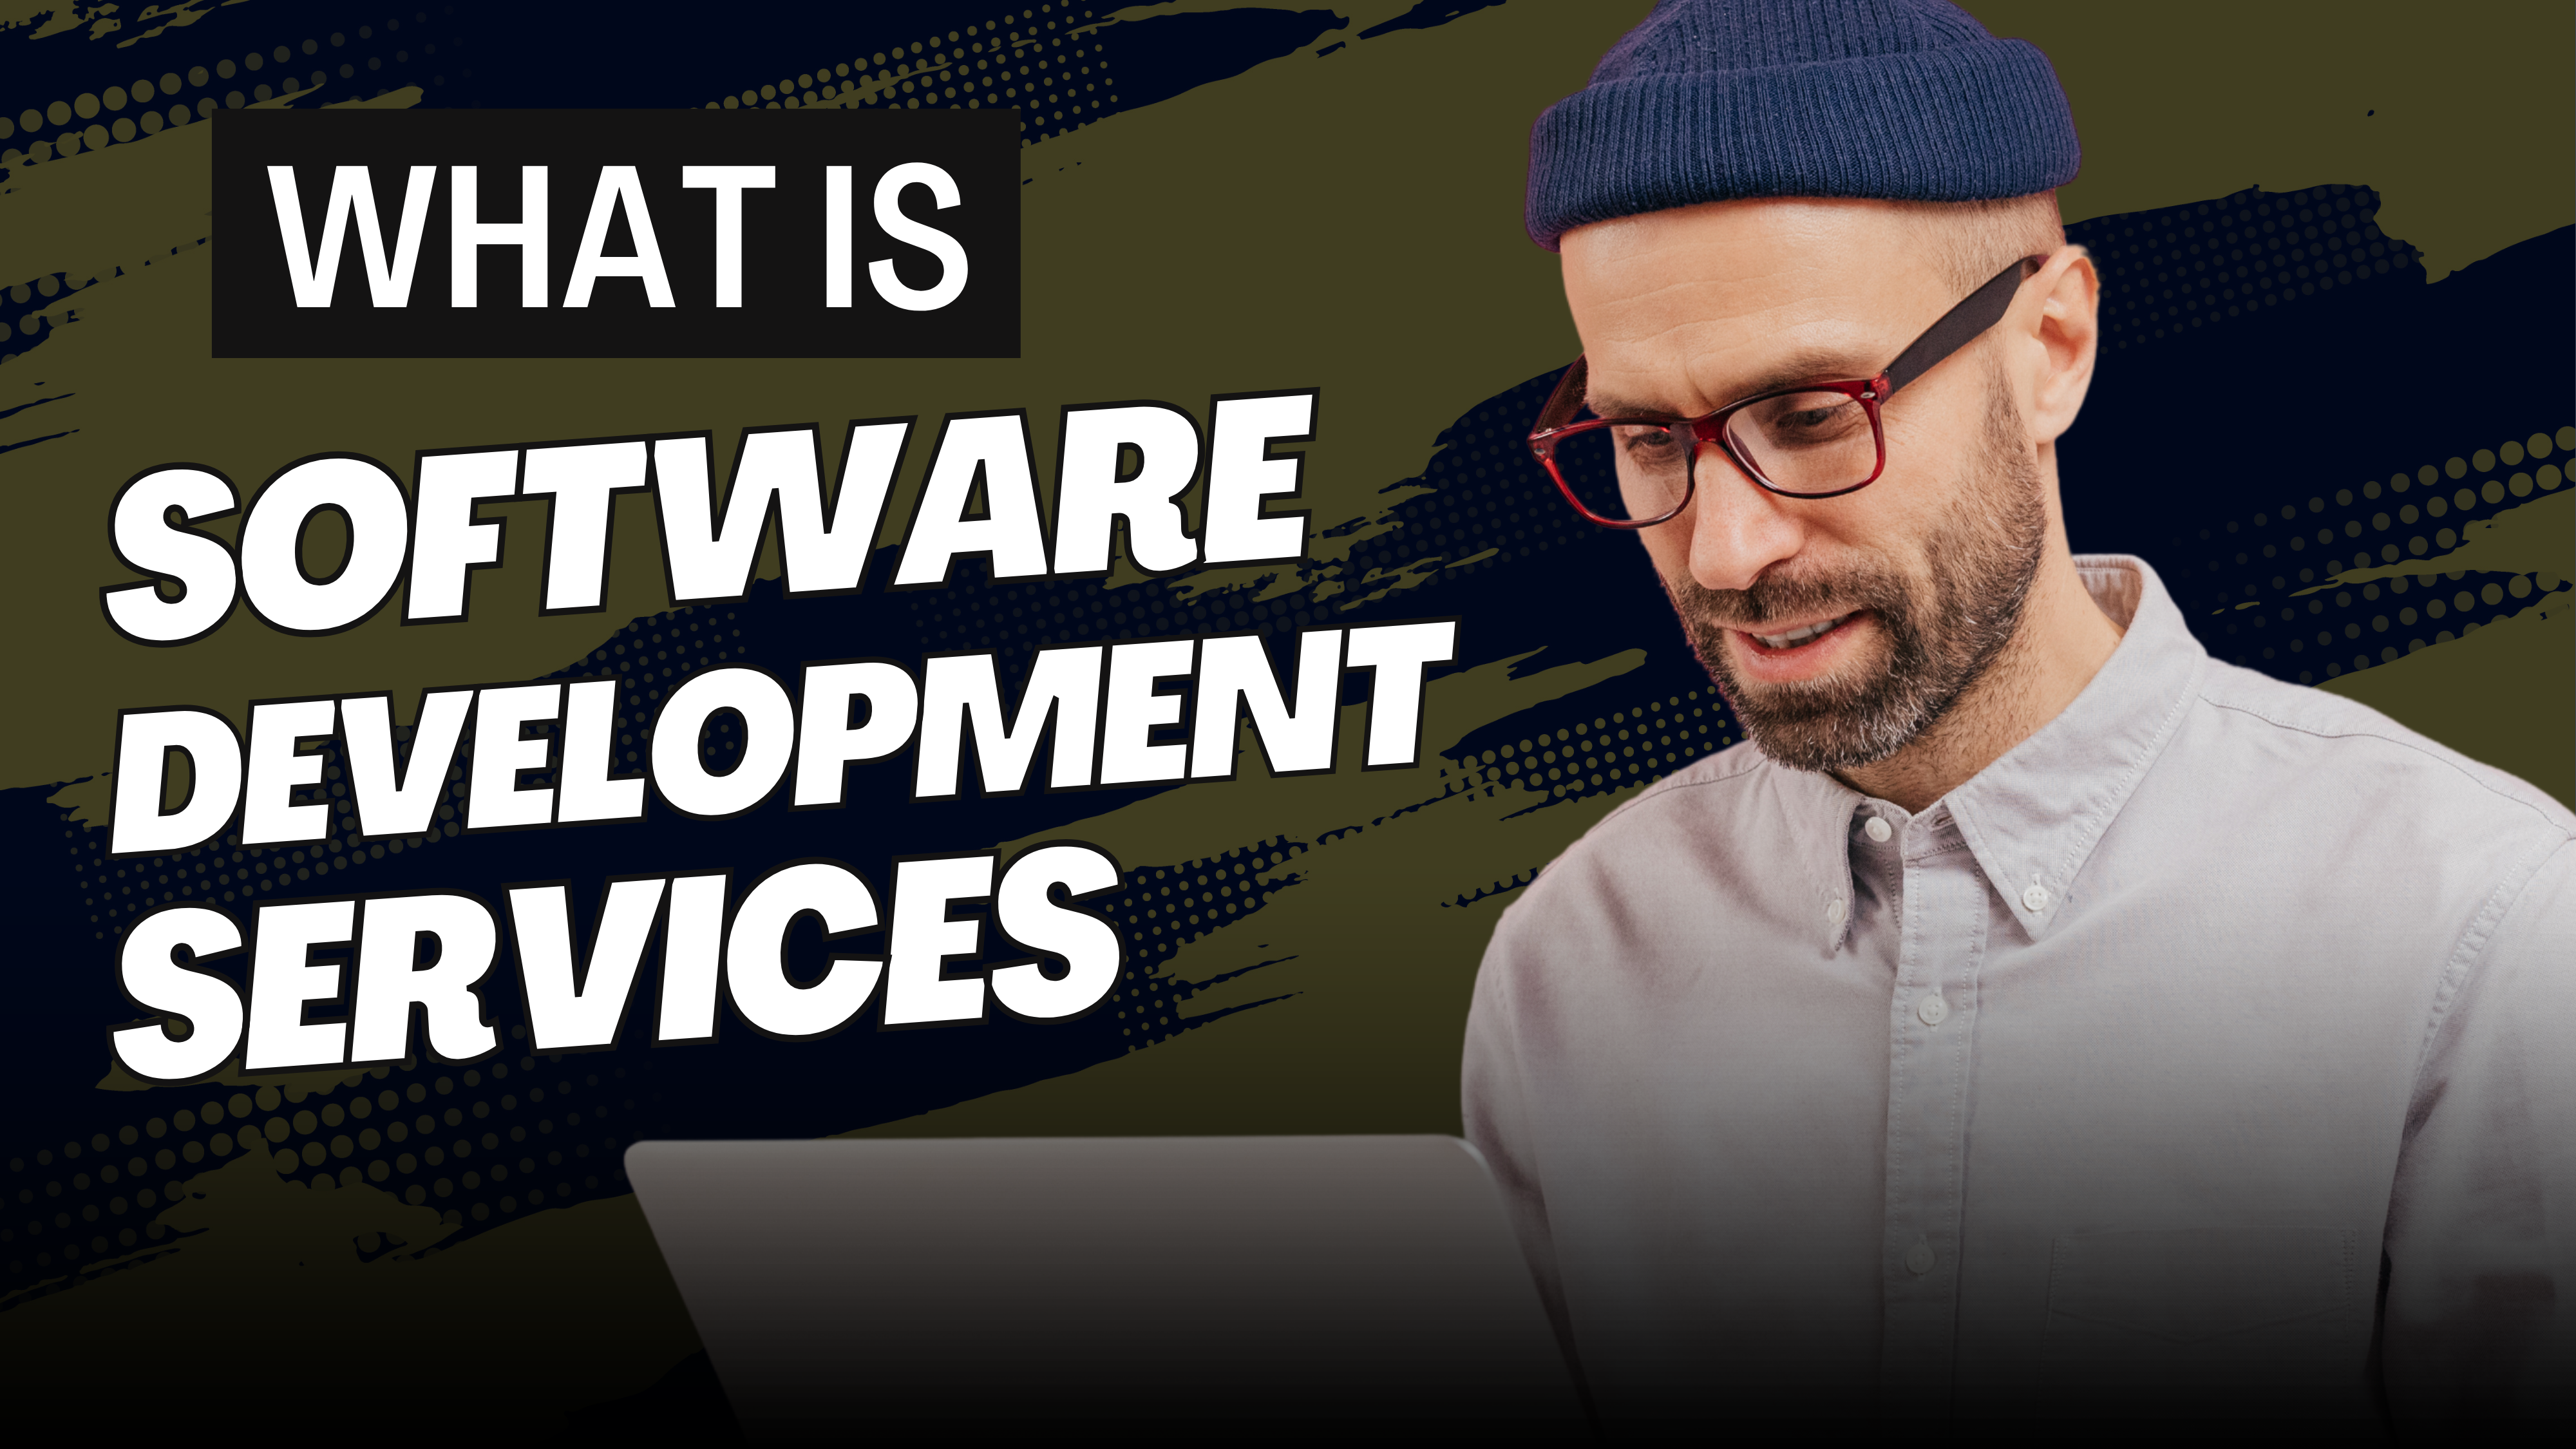 What is Software Development Services